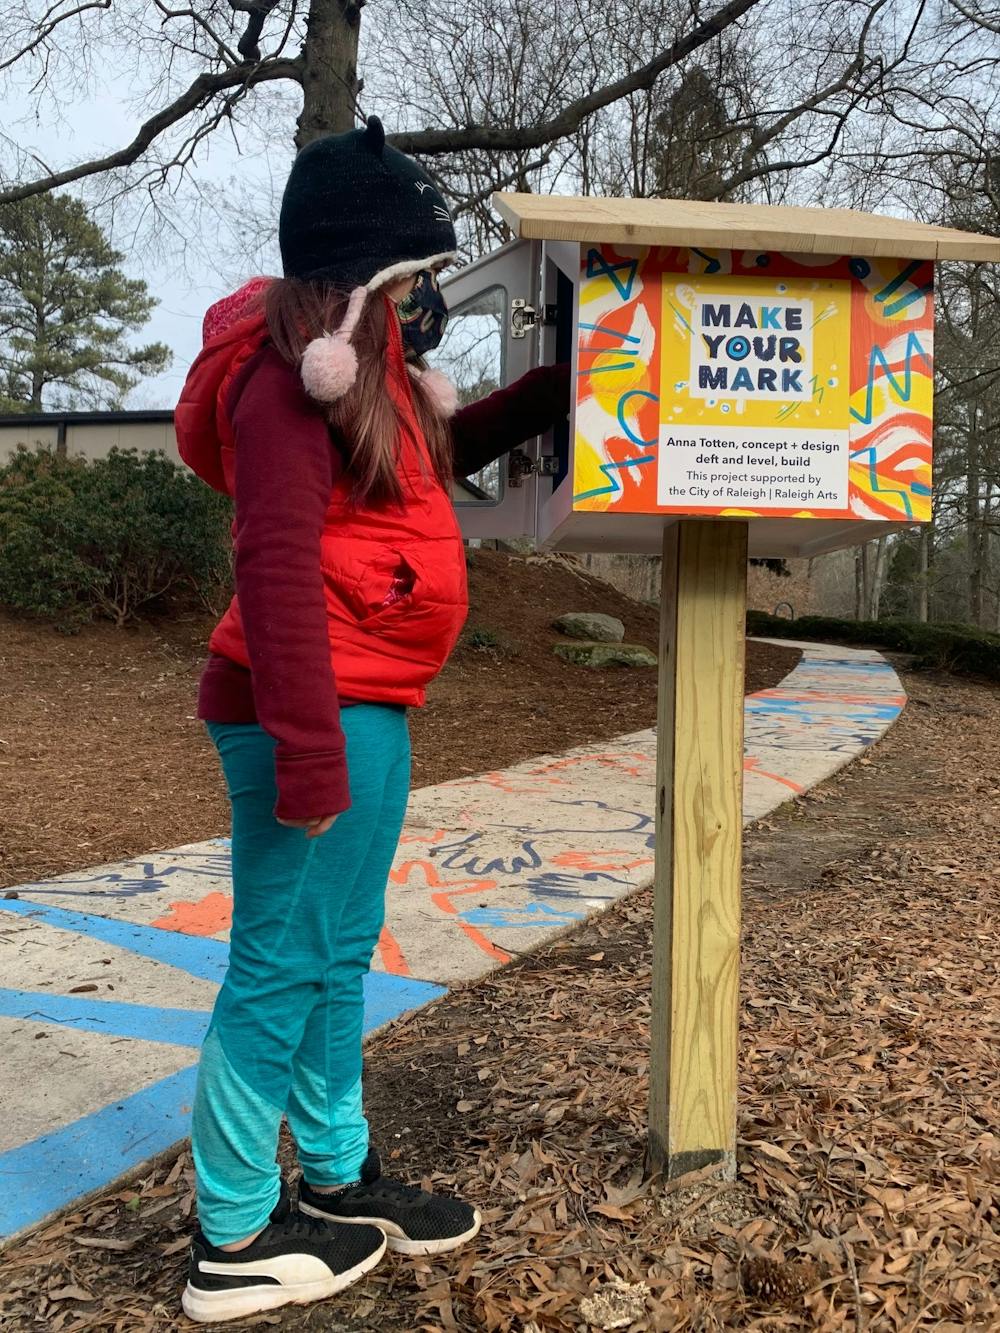 A young girl stands by an interactive mural that is part of the Make Your Mark series of sidewalk murals around Raleigh. Photo courtesy of Anna Totten